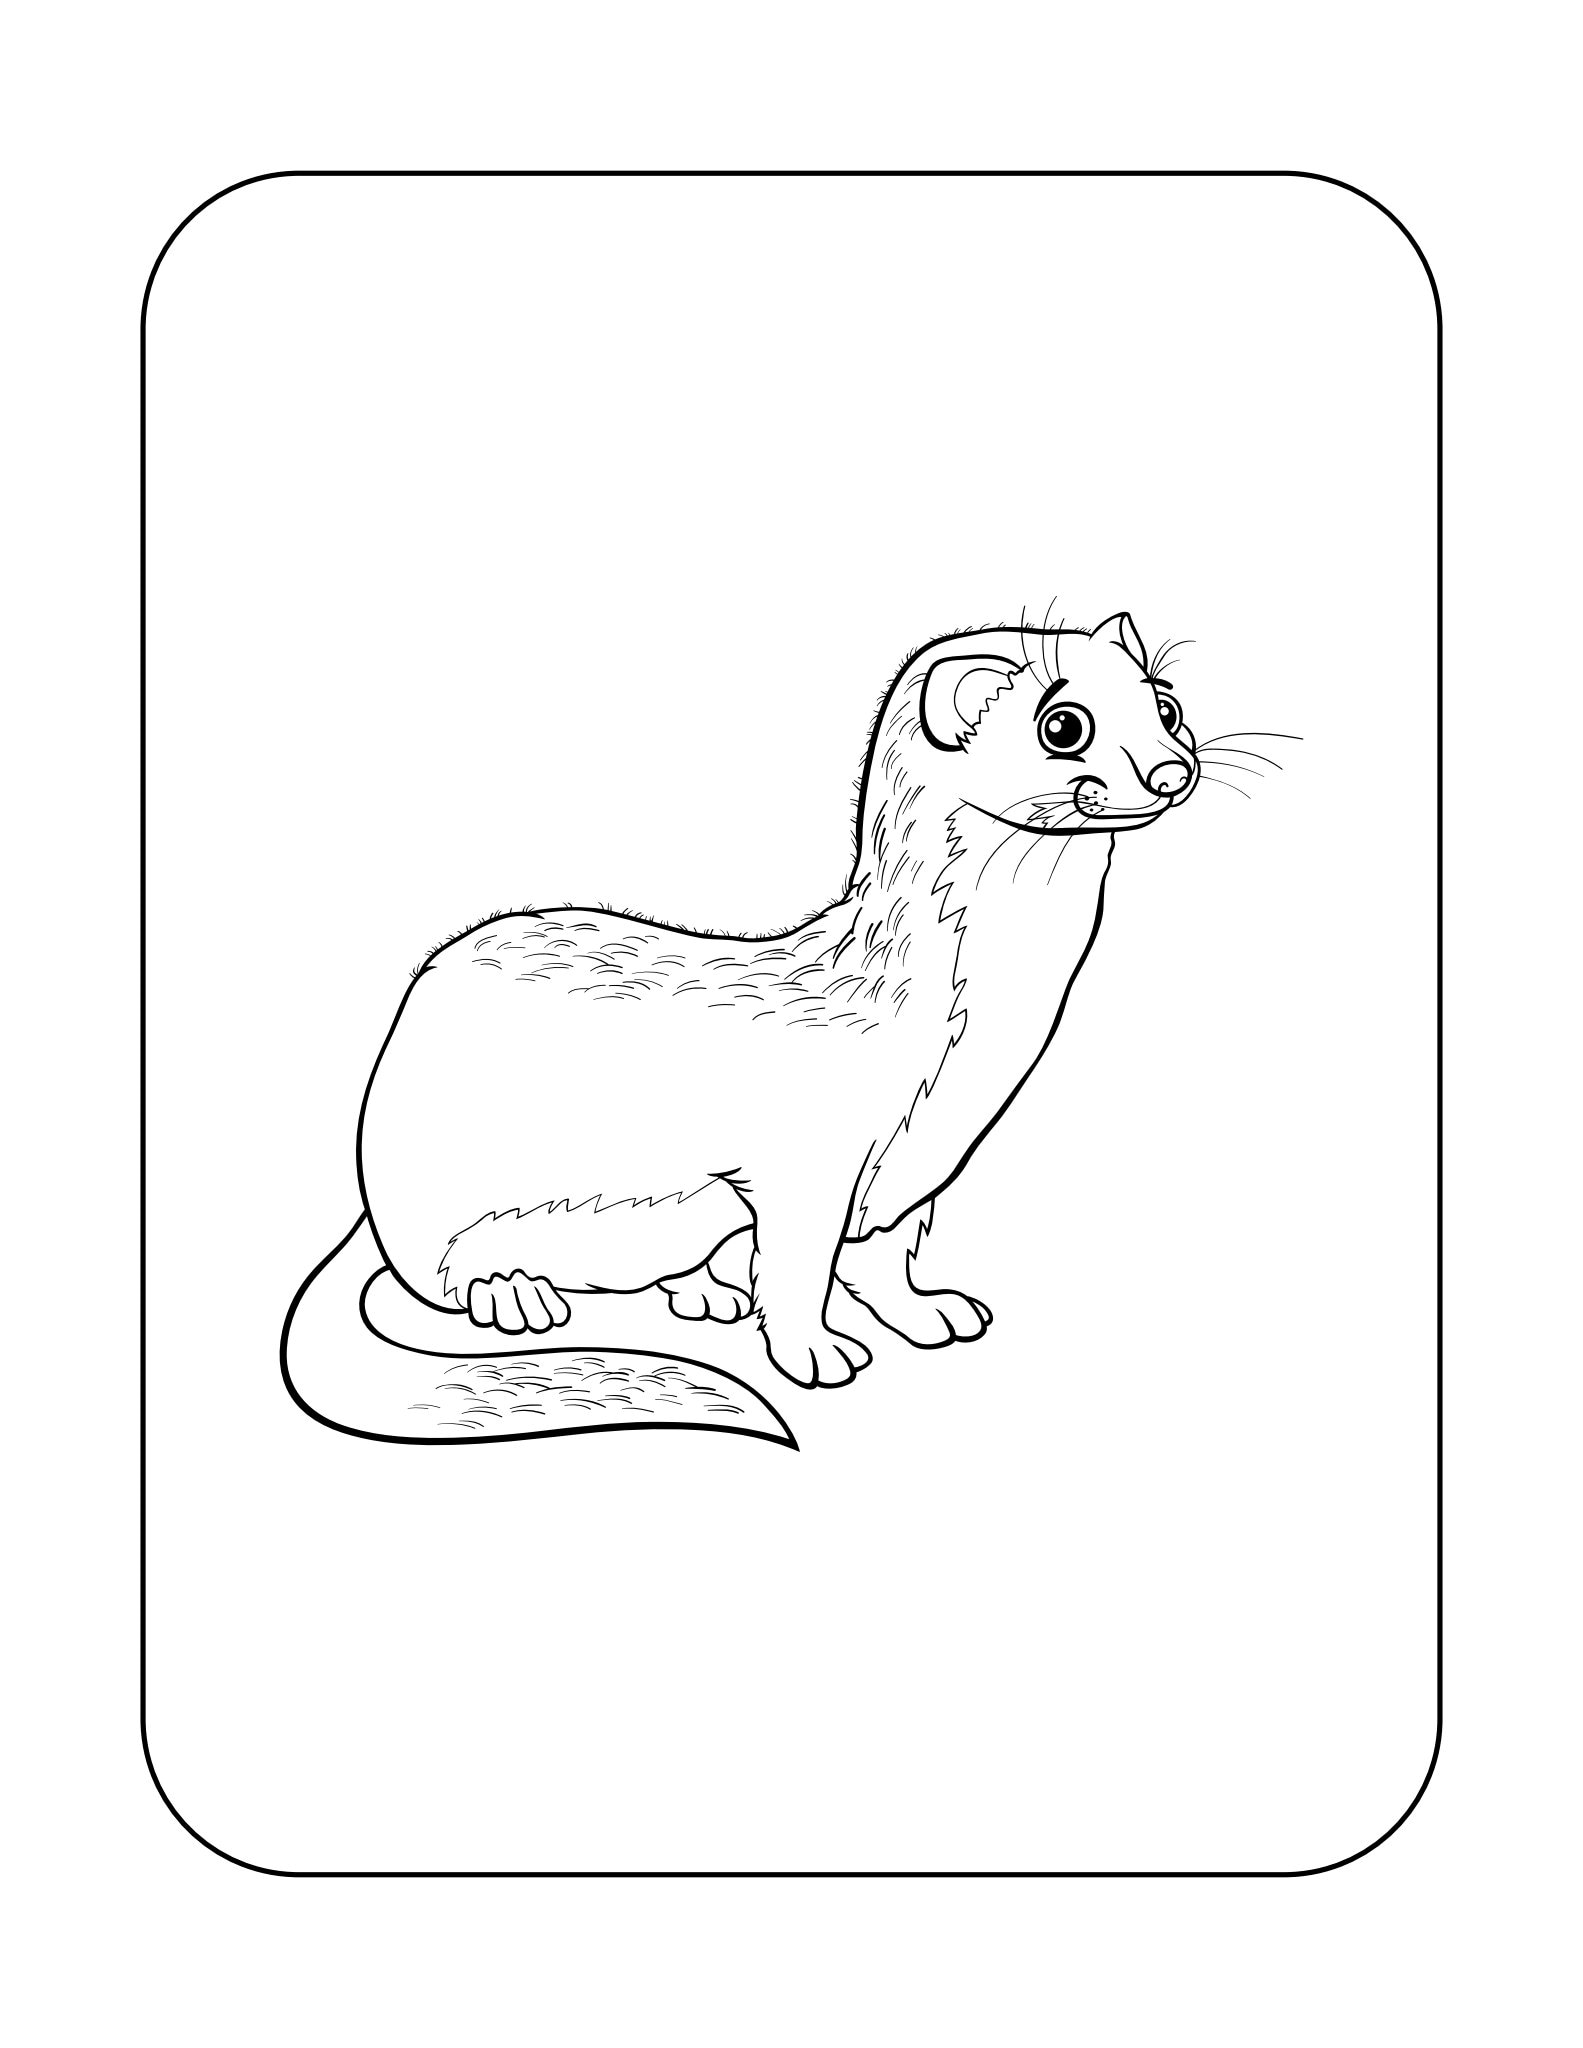 Animal digital coloring pages coloring pages animal color pages printable coloring pages kids coloring pages